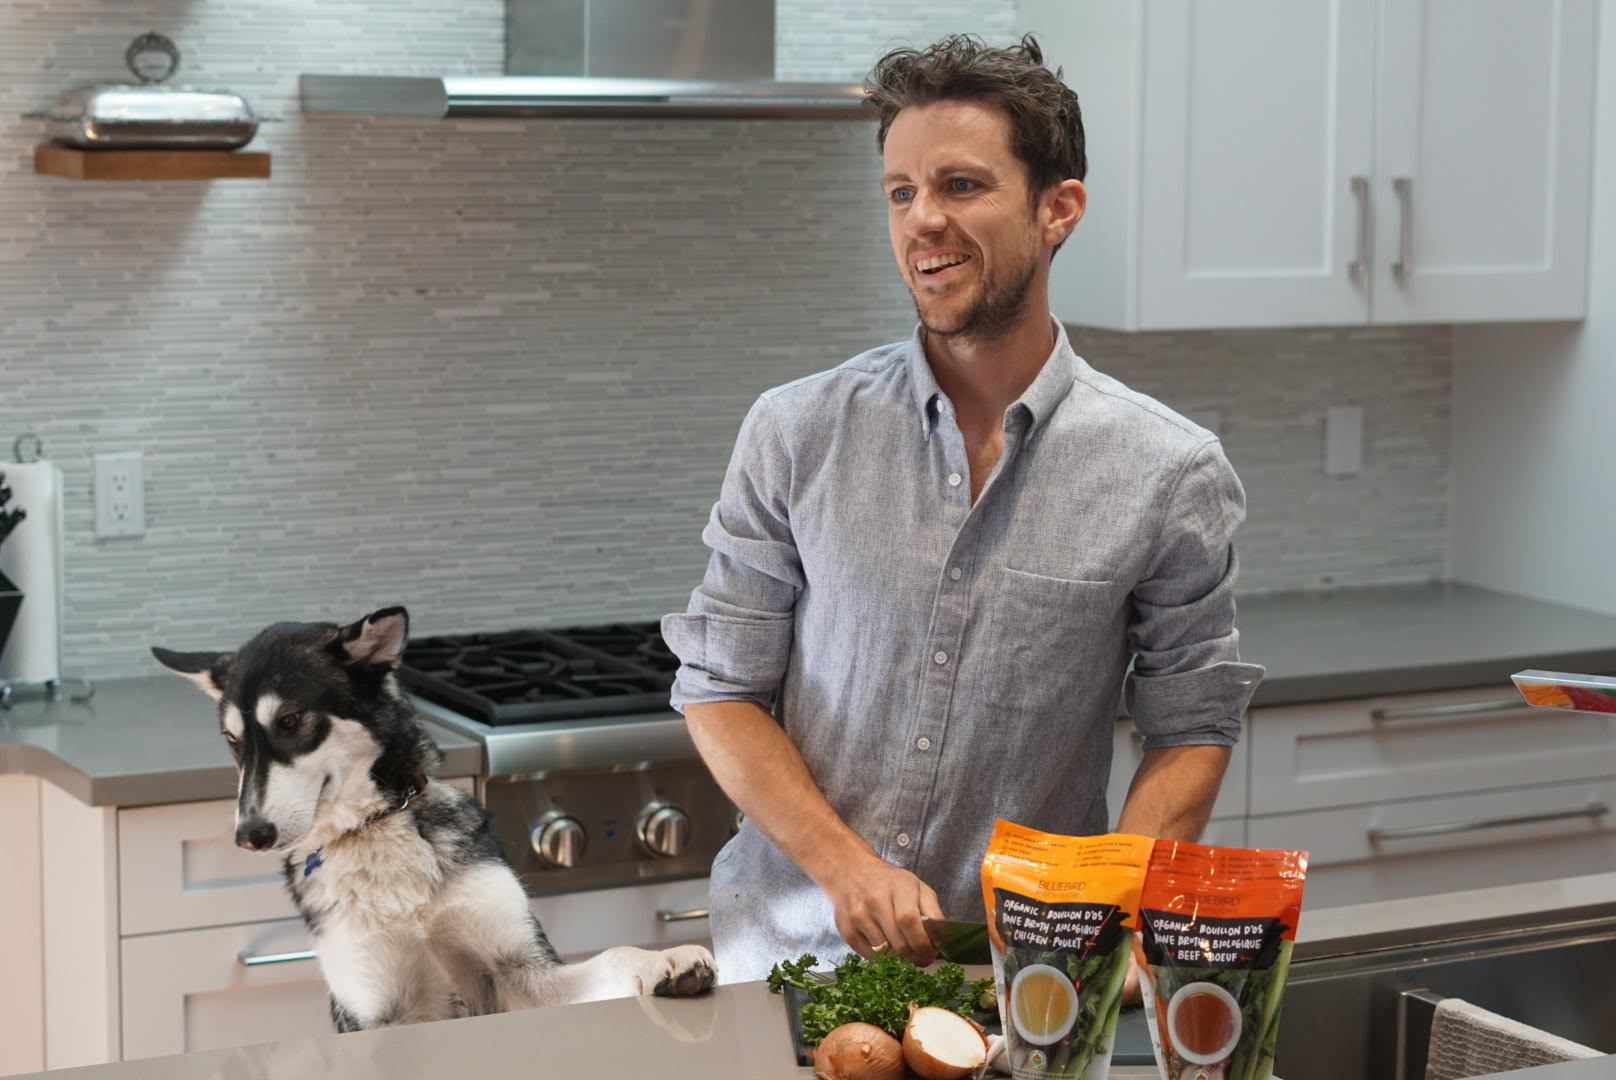 Connor from Bluebird Provisions organic bone broth chopping vegetables with his dog